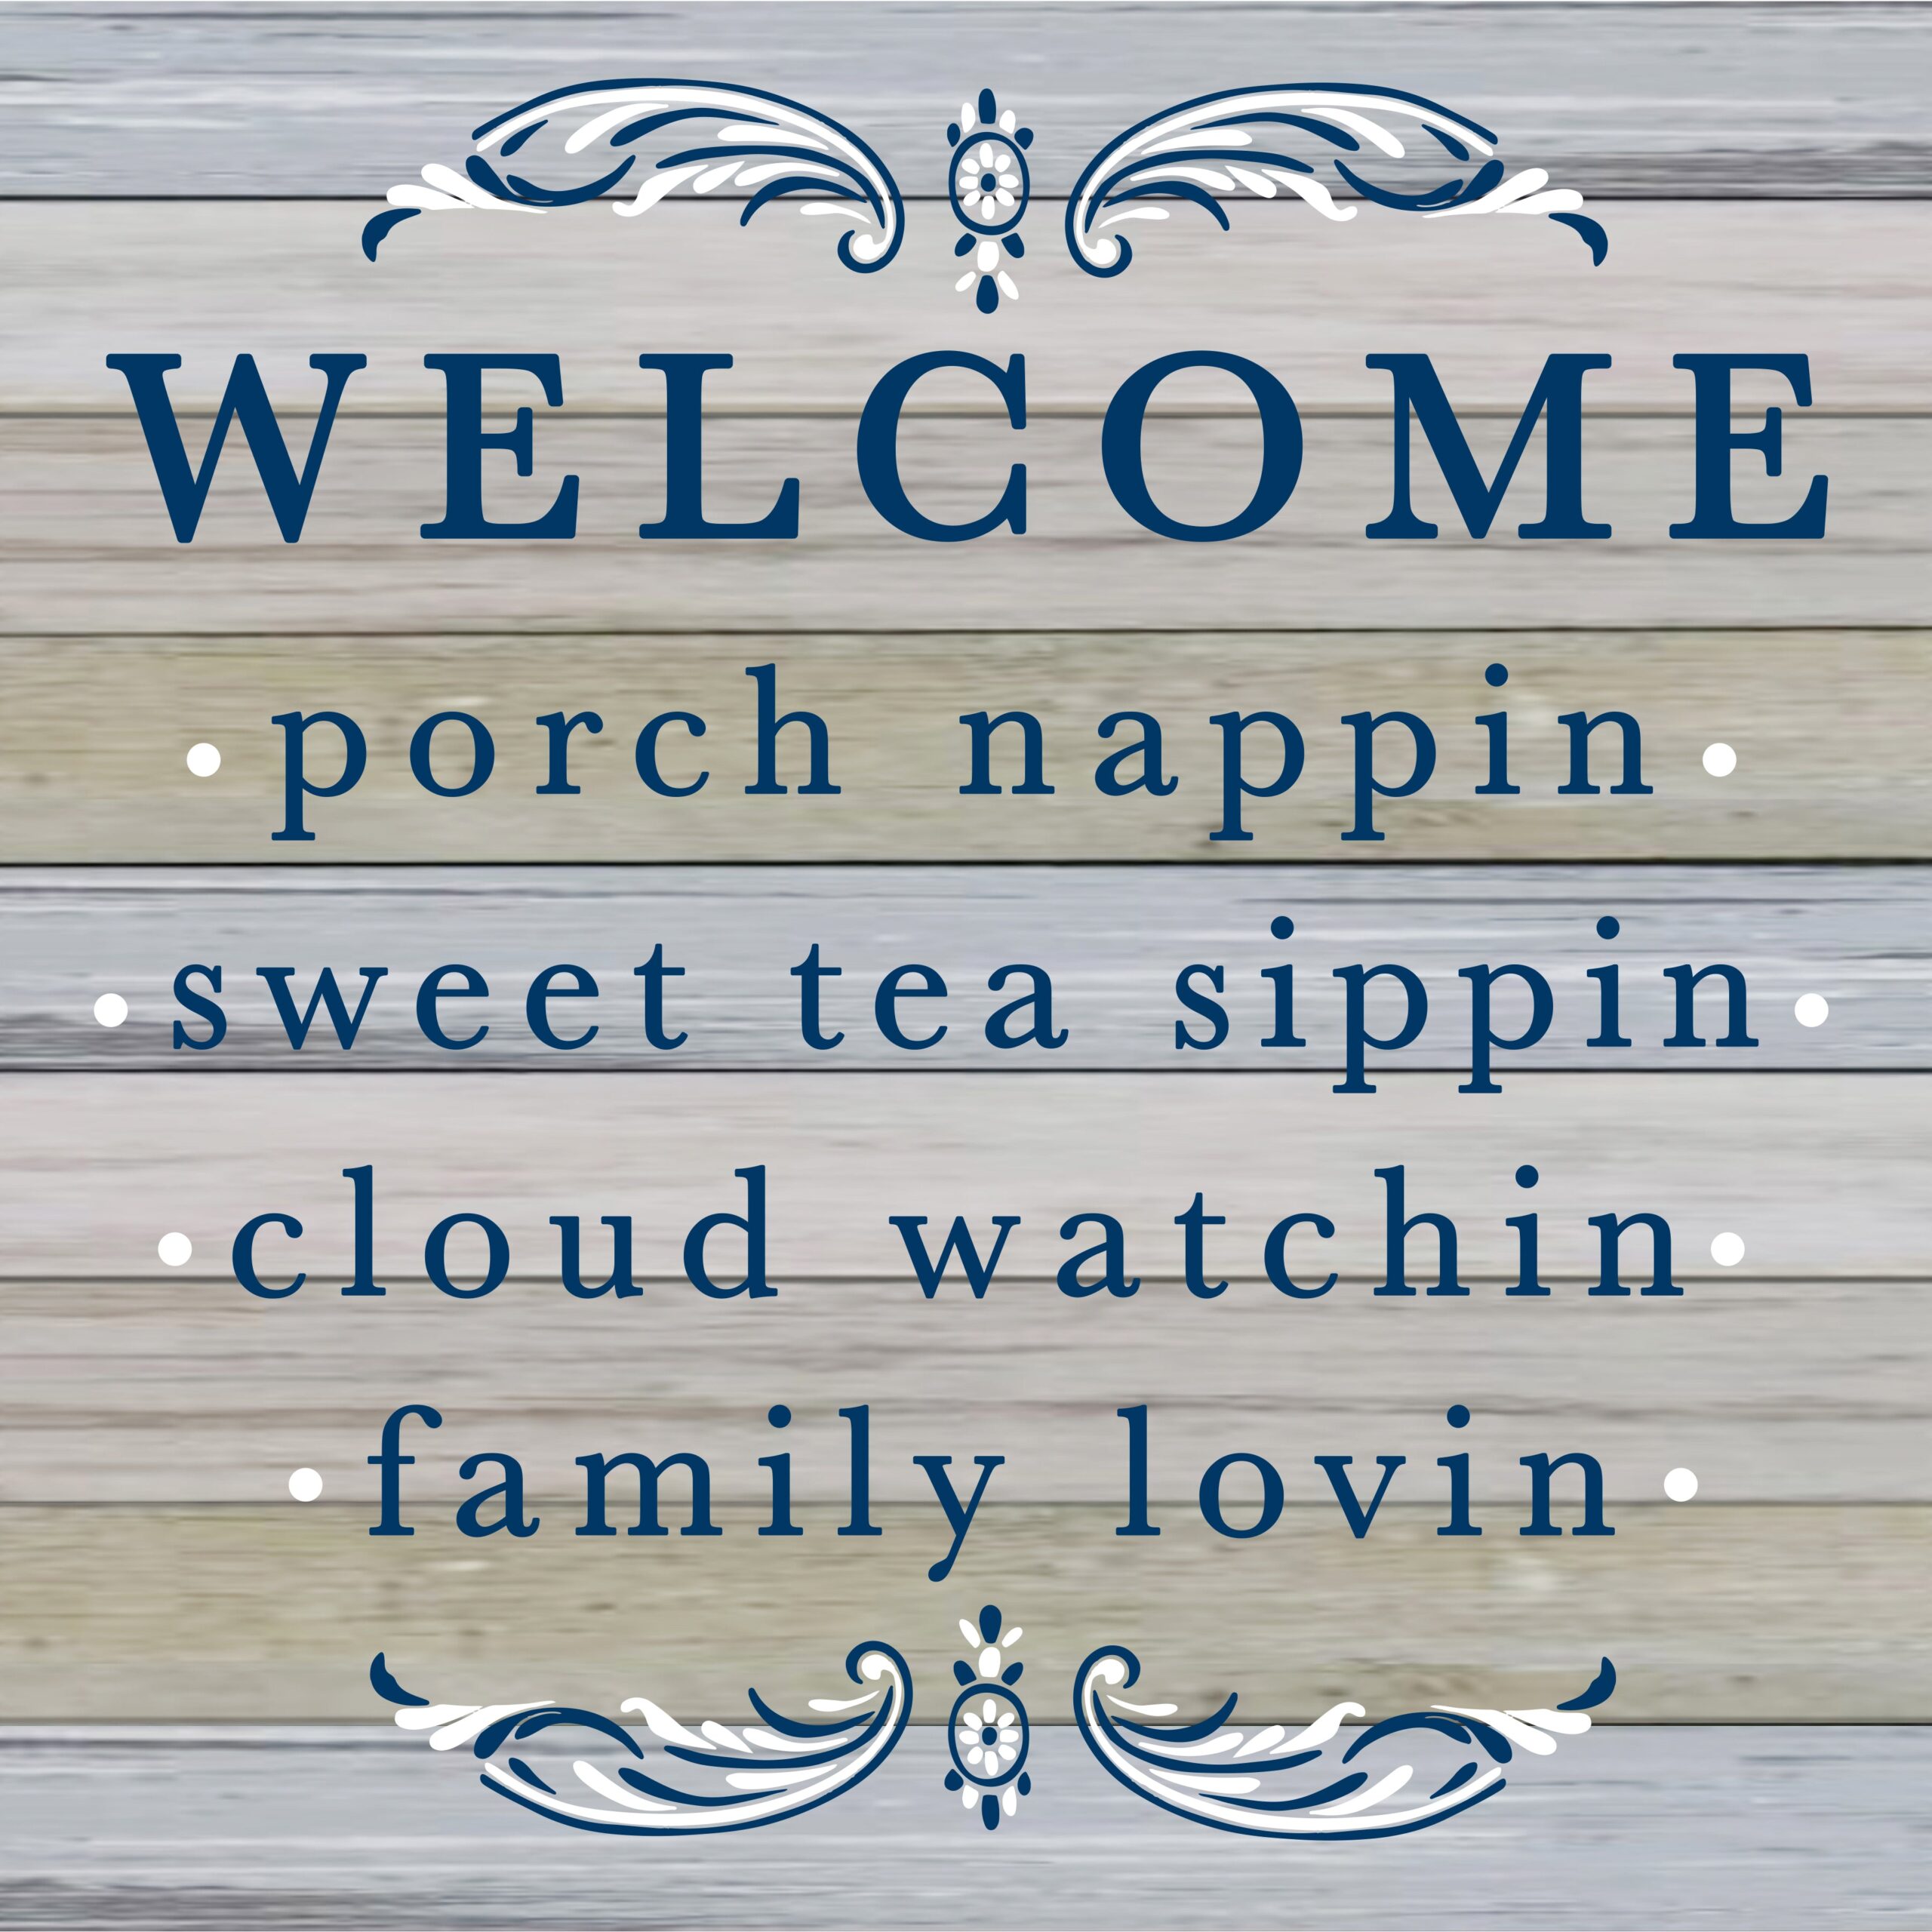 Welcome: porch nappin, sweet tea sippin, cloud watchin, family lovin / 12x12 Indoor/Outdoor Recycled Plastic Wall Art